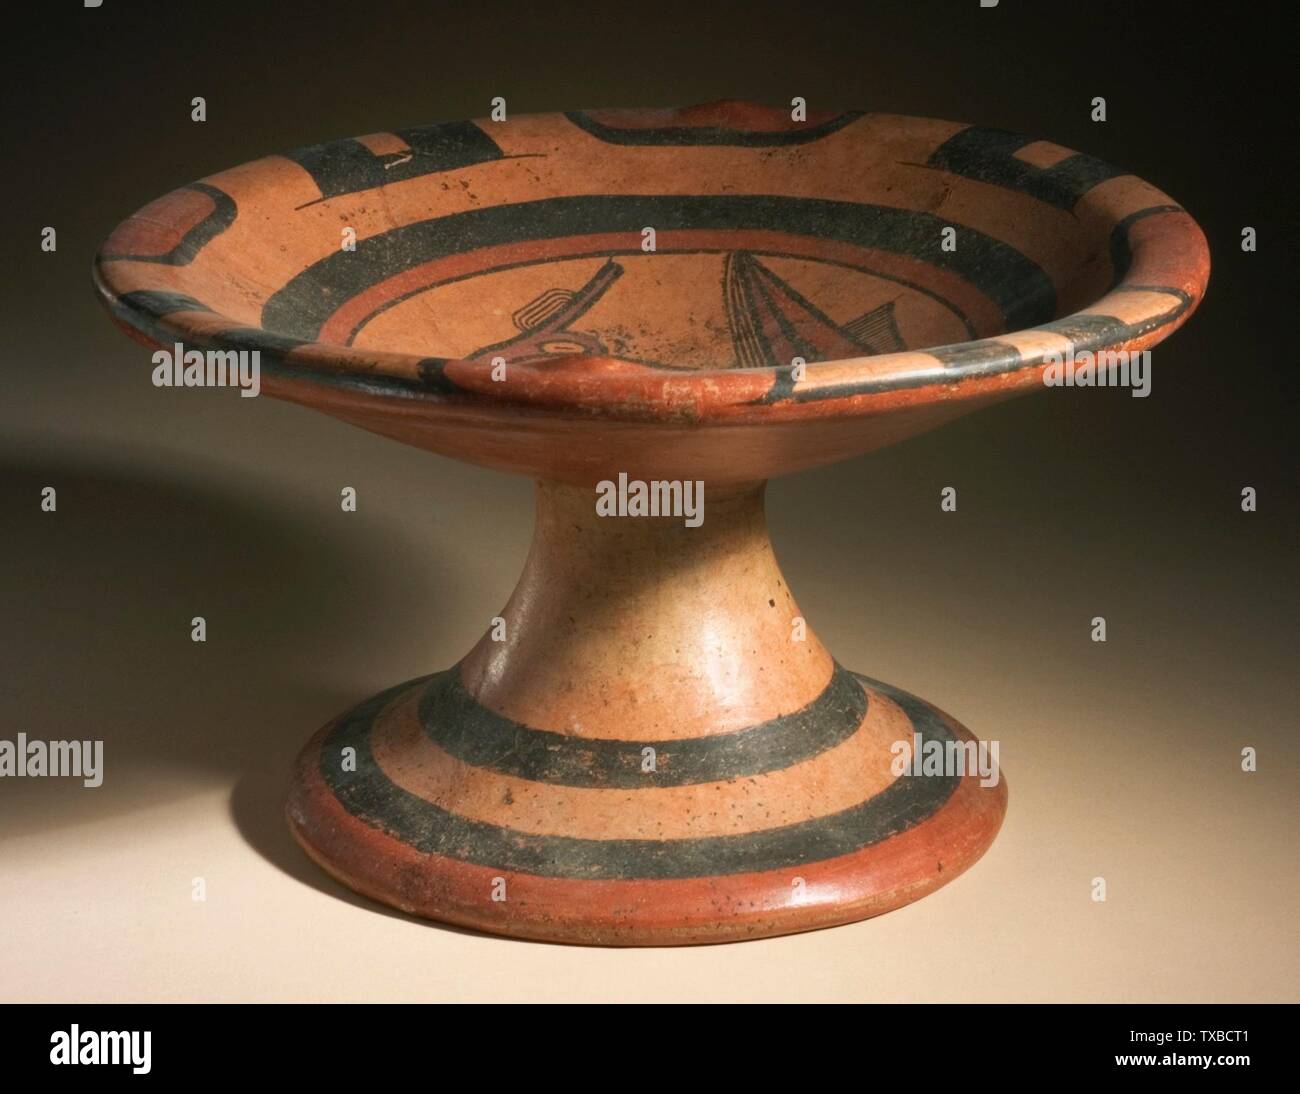 Pedestal Dish with Ray;  Panama, Veraguas, A.D. 500-800 Furnishings; Serviceware Ceramic Height:  5 1/2 in. (14 cm); Diameter:  9 1/8 in. (23.2 cm) Gift of Drs. Alan Grinnell and Feelie Lee (M.2001.168.7) Art of the Ancient Americas; A.D. 500-800; Stock Photo